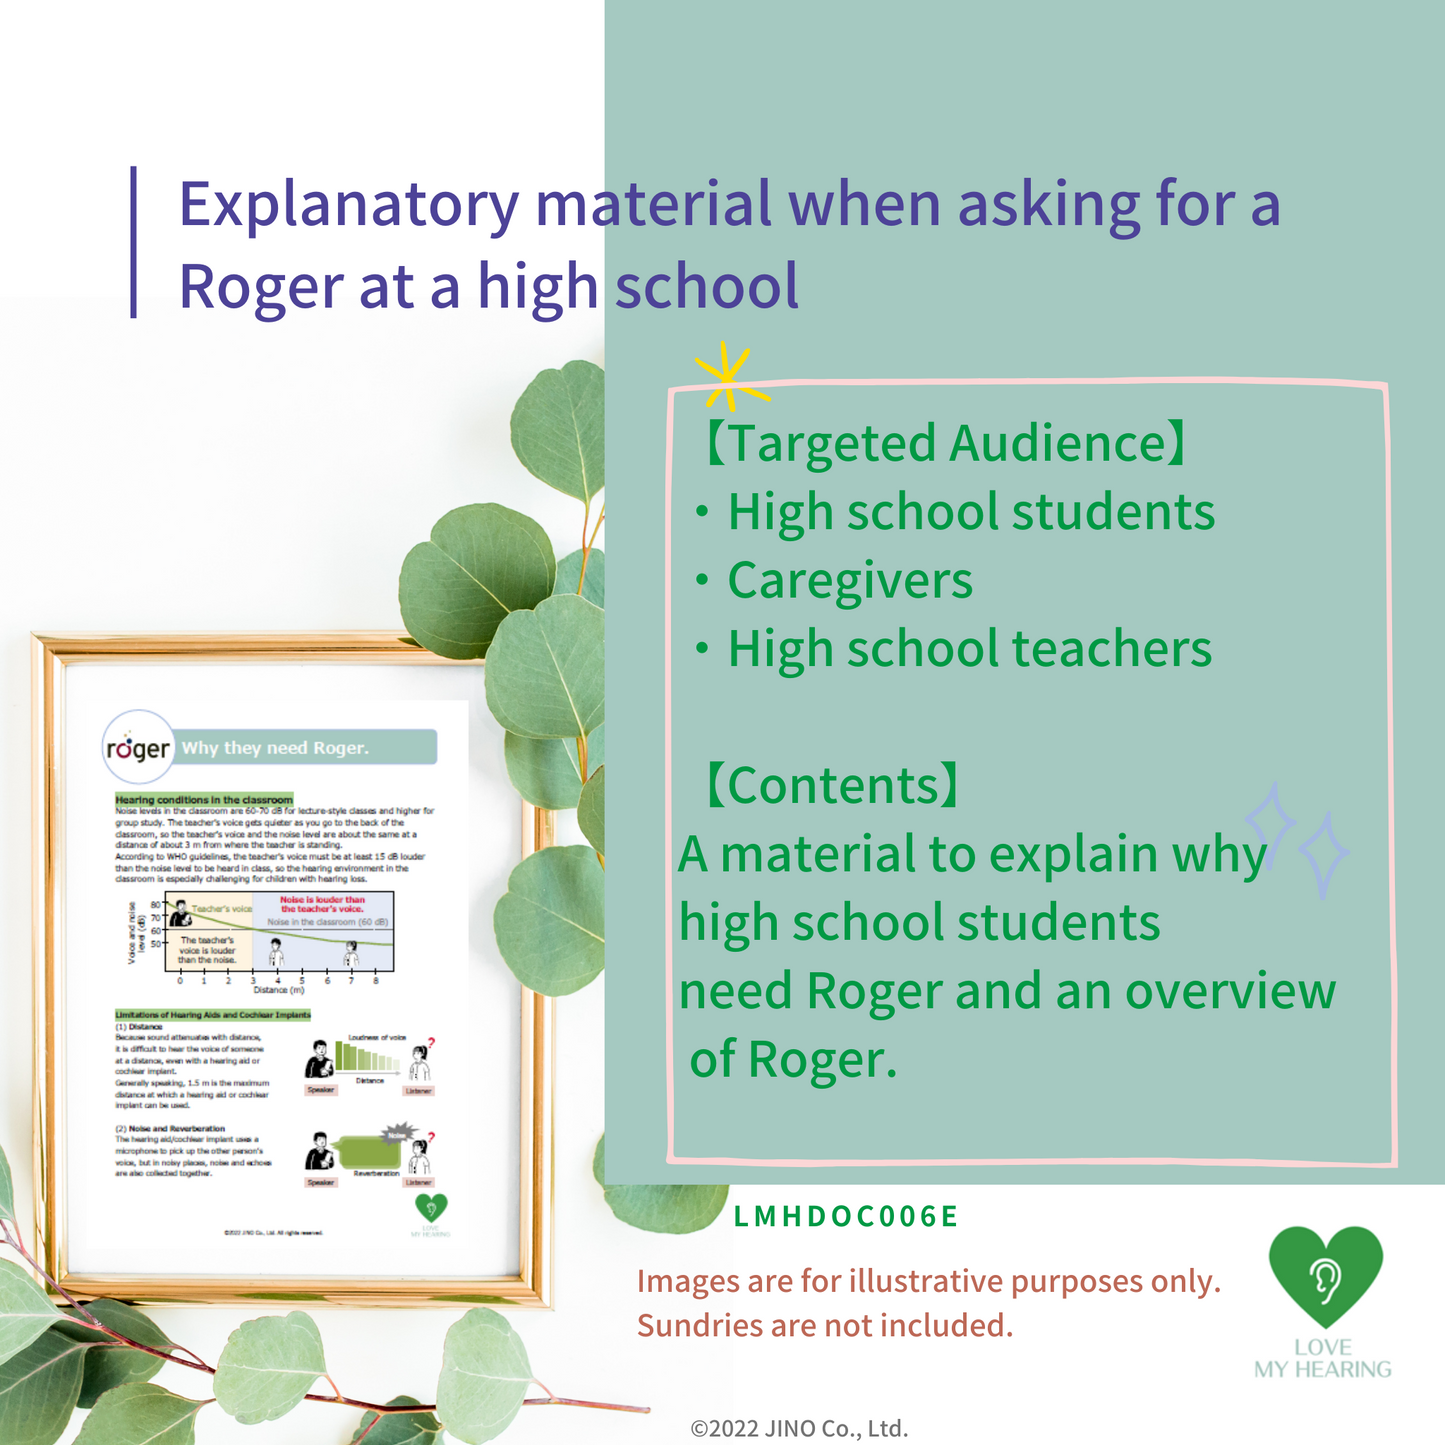 Explanatory material when asking for a Roger at a high school